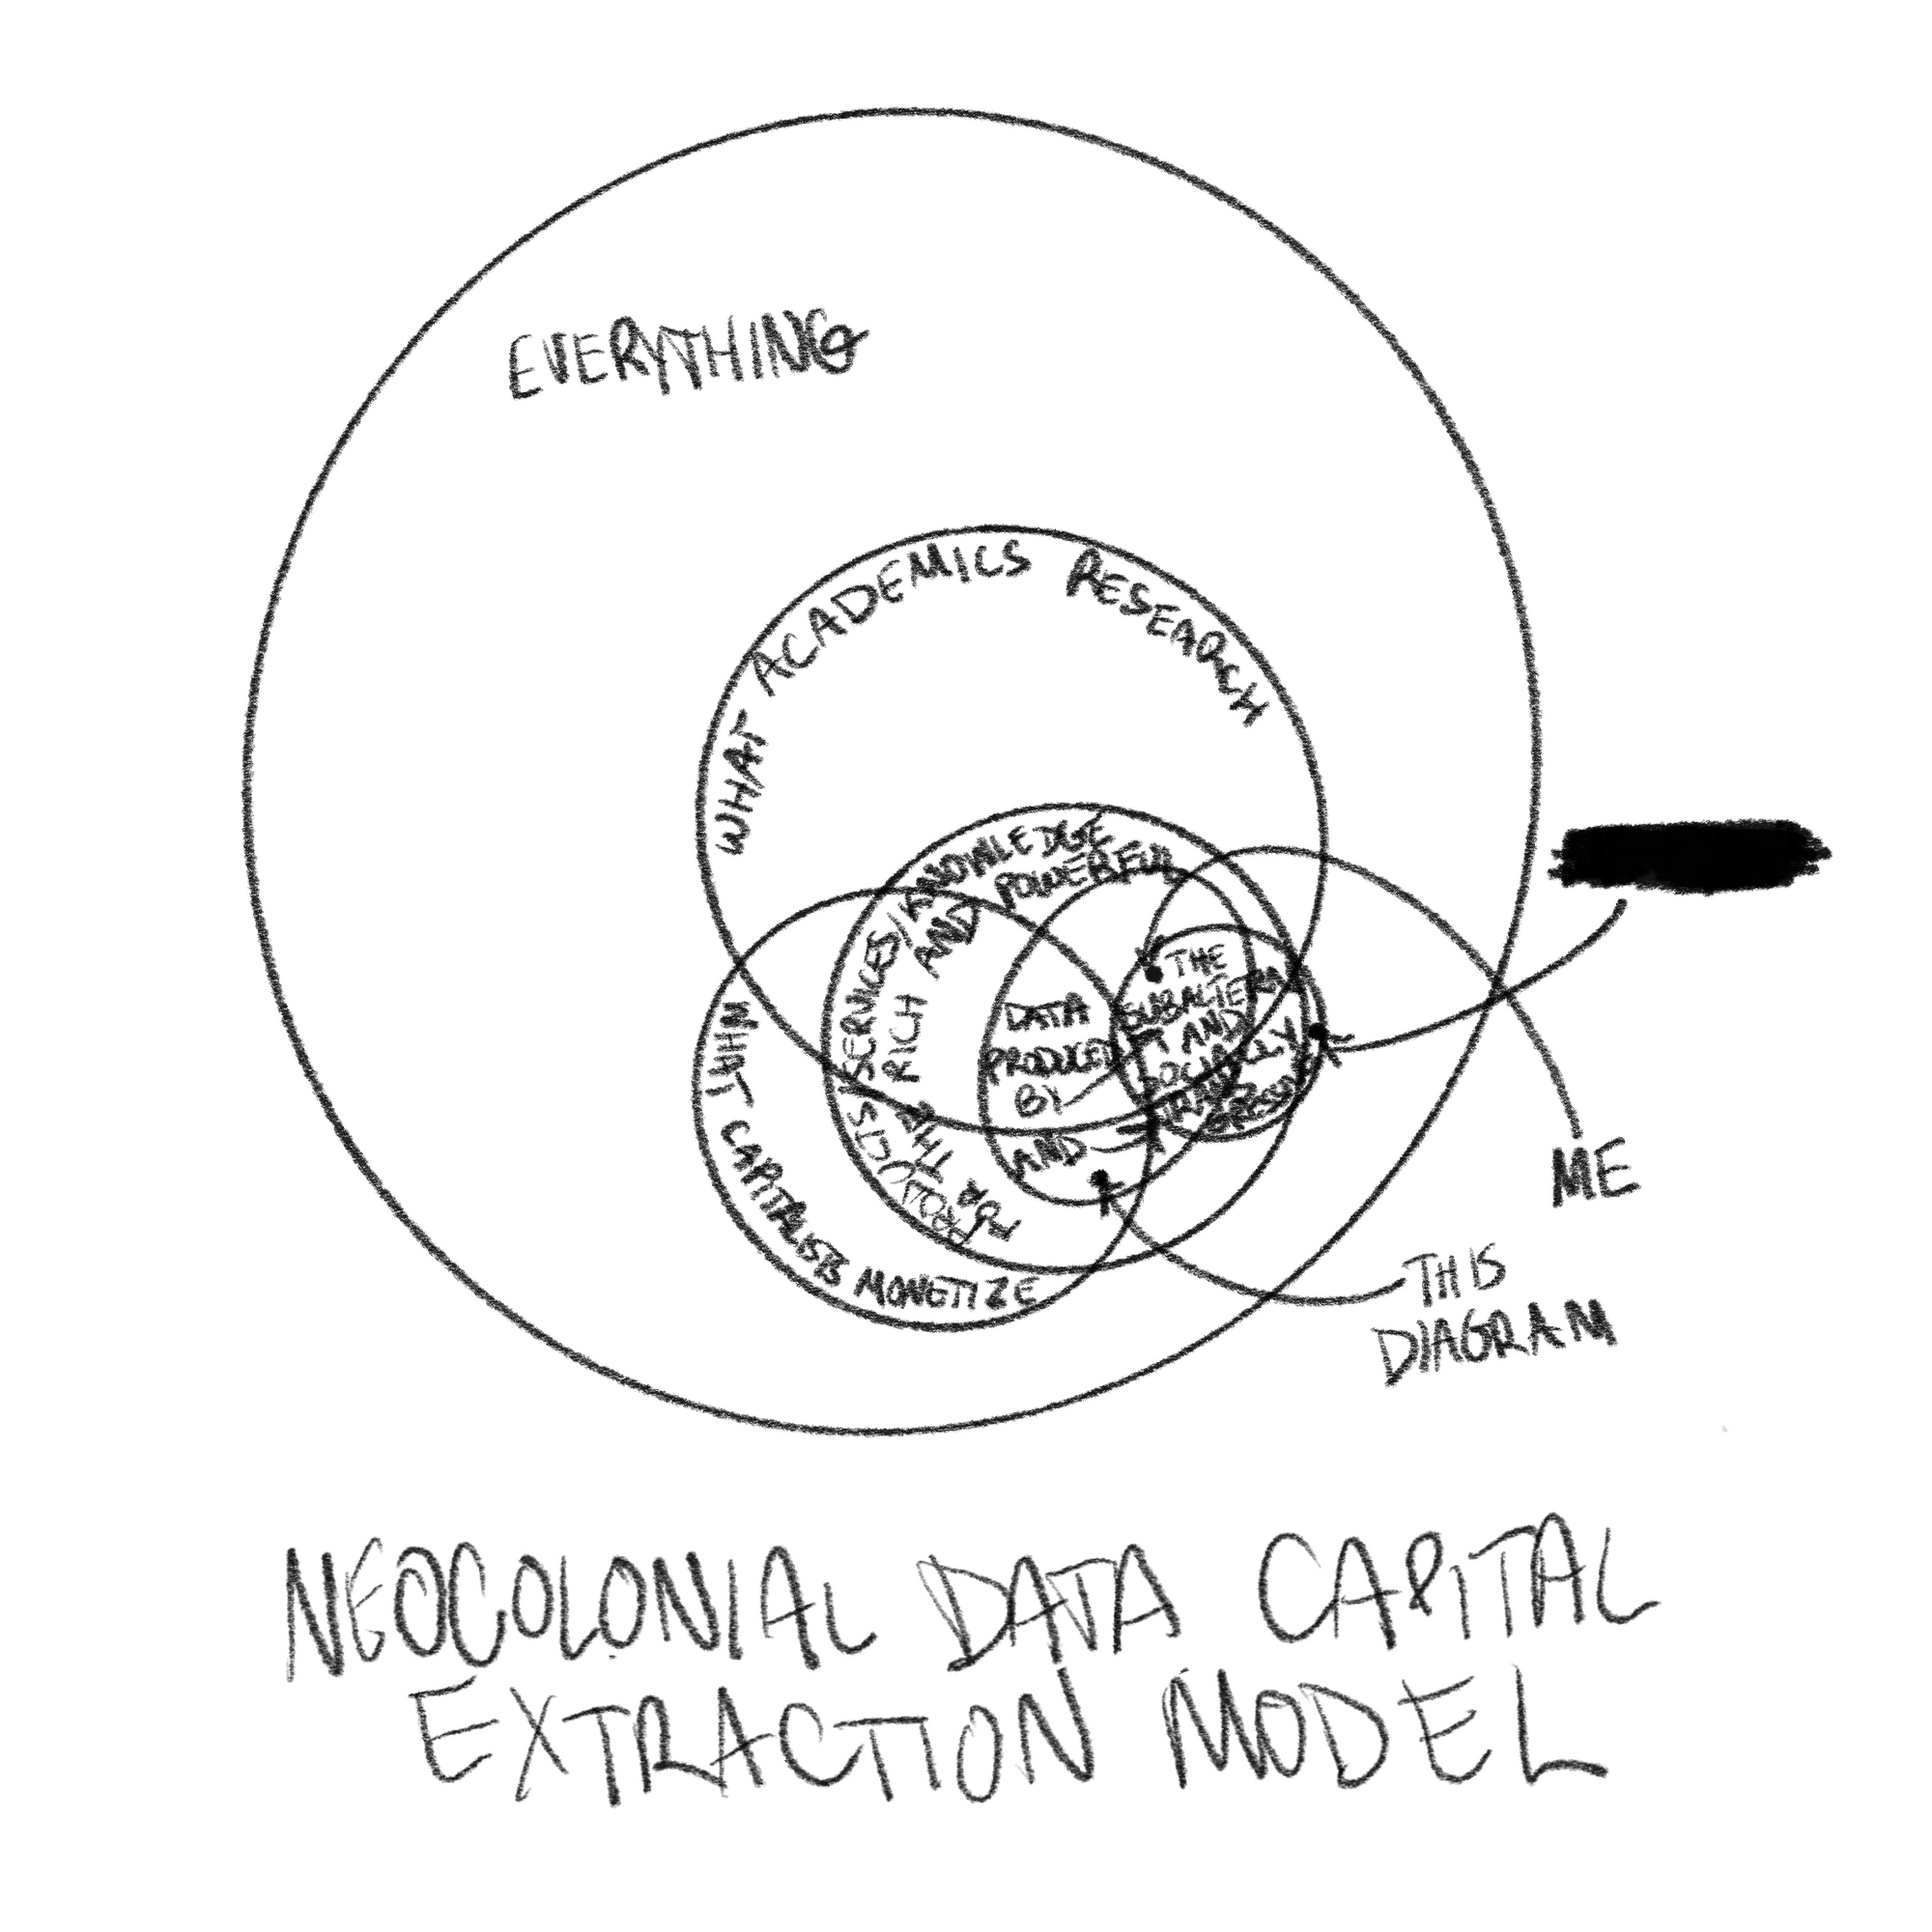 Venn diagram titled "NEOCOLONIAL DATA CAPITAL EXTRACTION MODEL", the largest circle labeled "EVERYTHING". Bottom-right quarter of this circle has several overlapping circles, the largest labeled "WHAT GETS RESEARCHED BY ACADEMIA". Slightly smaller circle overlapping it at bottom-left is labeled "WHAT GETS MONETIZED BY CAPITALISTS". A similarly sized circle overlapping the two previous is labeled "PRODUCTS/SERVICES/KNOWLEDGE FOR THE RICH AND POWERFUL". Completely inside this circle and overlapping the two before it is a smaller oval labeled "DATA PRODUCED BY THE SUBALTERN AND SOCIALLY TRANSGRESSIVE". A dot inside this circle as well as all the previous ones has an arrow pointing to it labeled "THIS DIAGRAM". The smallest circle is labeled "THE SUBALTERN/SOCIALLY TRANSGRESSIVE" and overlaps all the previous ones, save for a sliver at right that remains outside all but the outermost circle. A dot inside this circle as well as all the previous ones has an arrow pointing to it labeled "ME". A dot inside this circle's extruding sliver has an arrow pointing to it, its label redacted, scratched out in black.